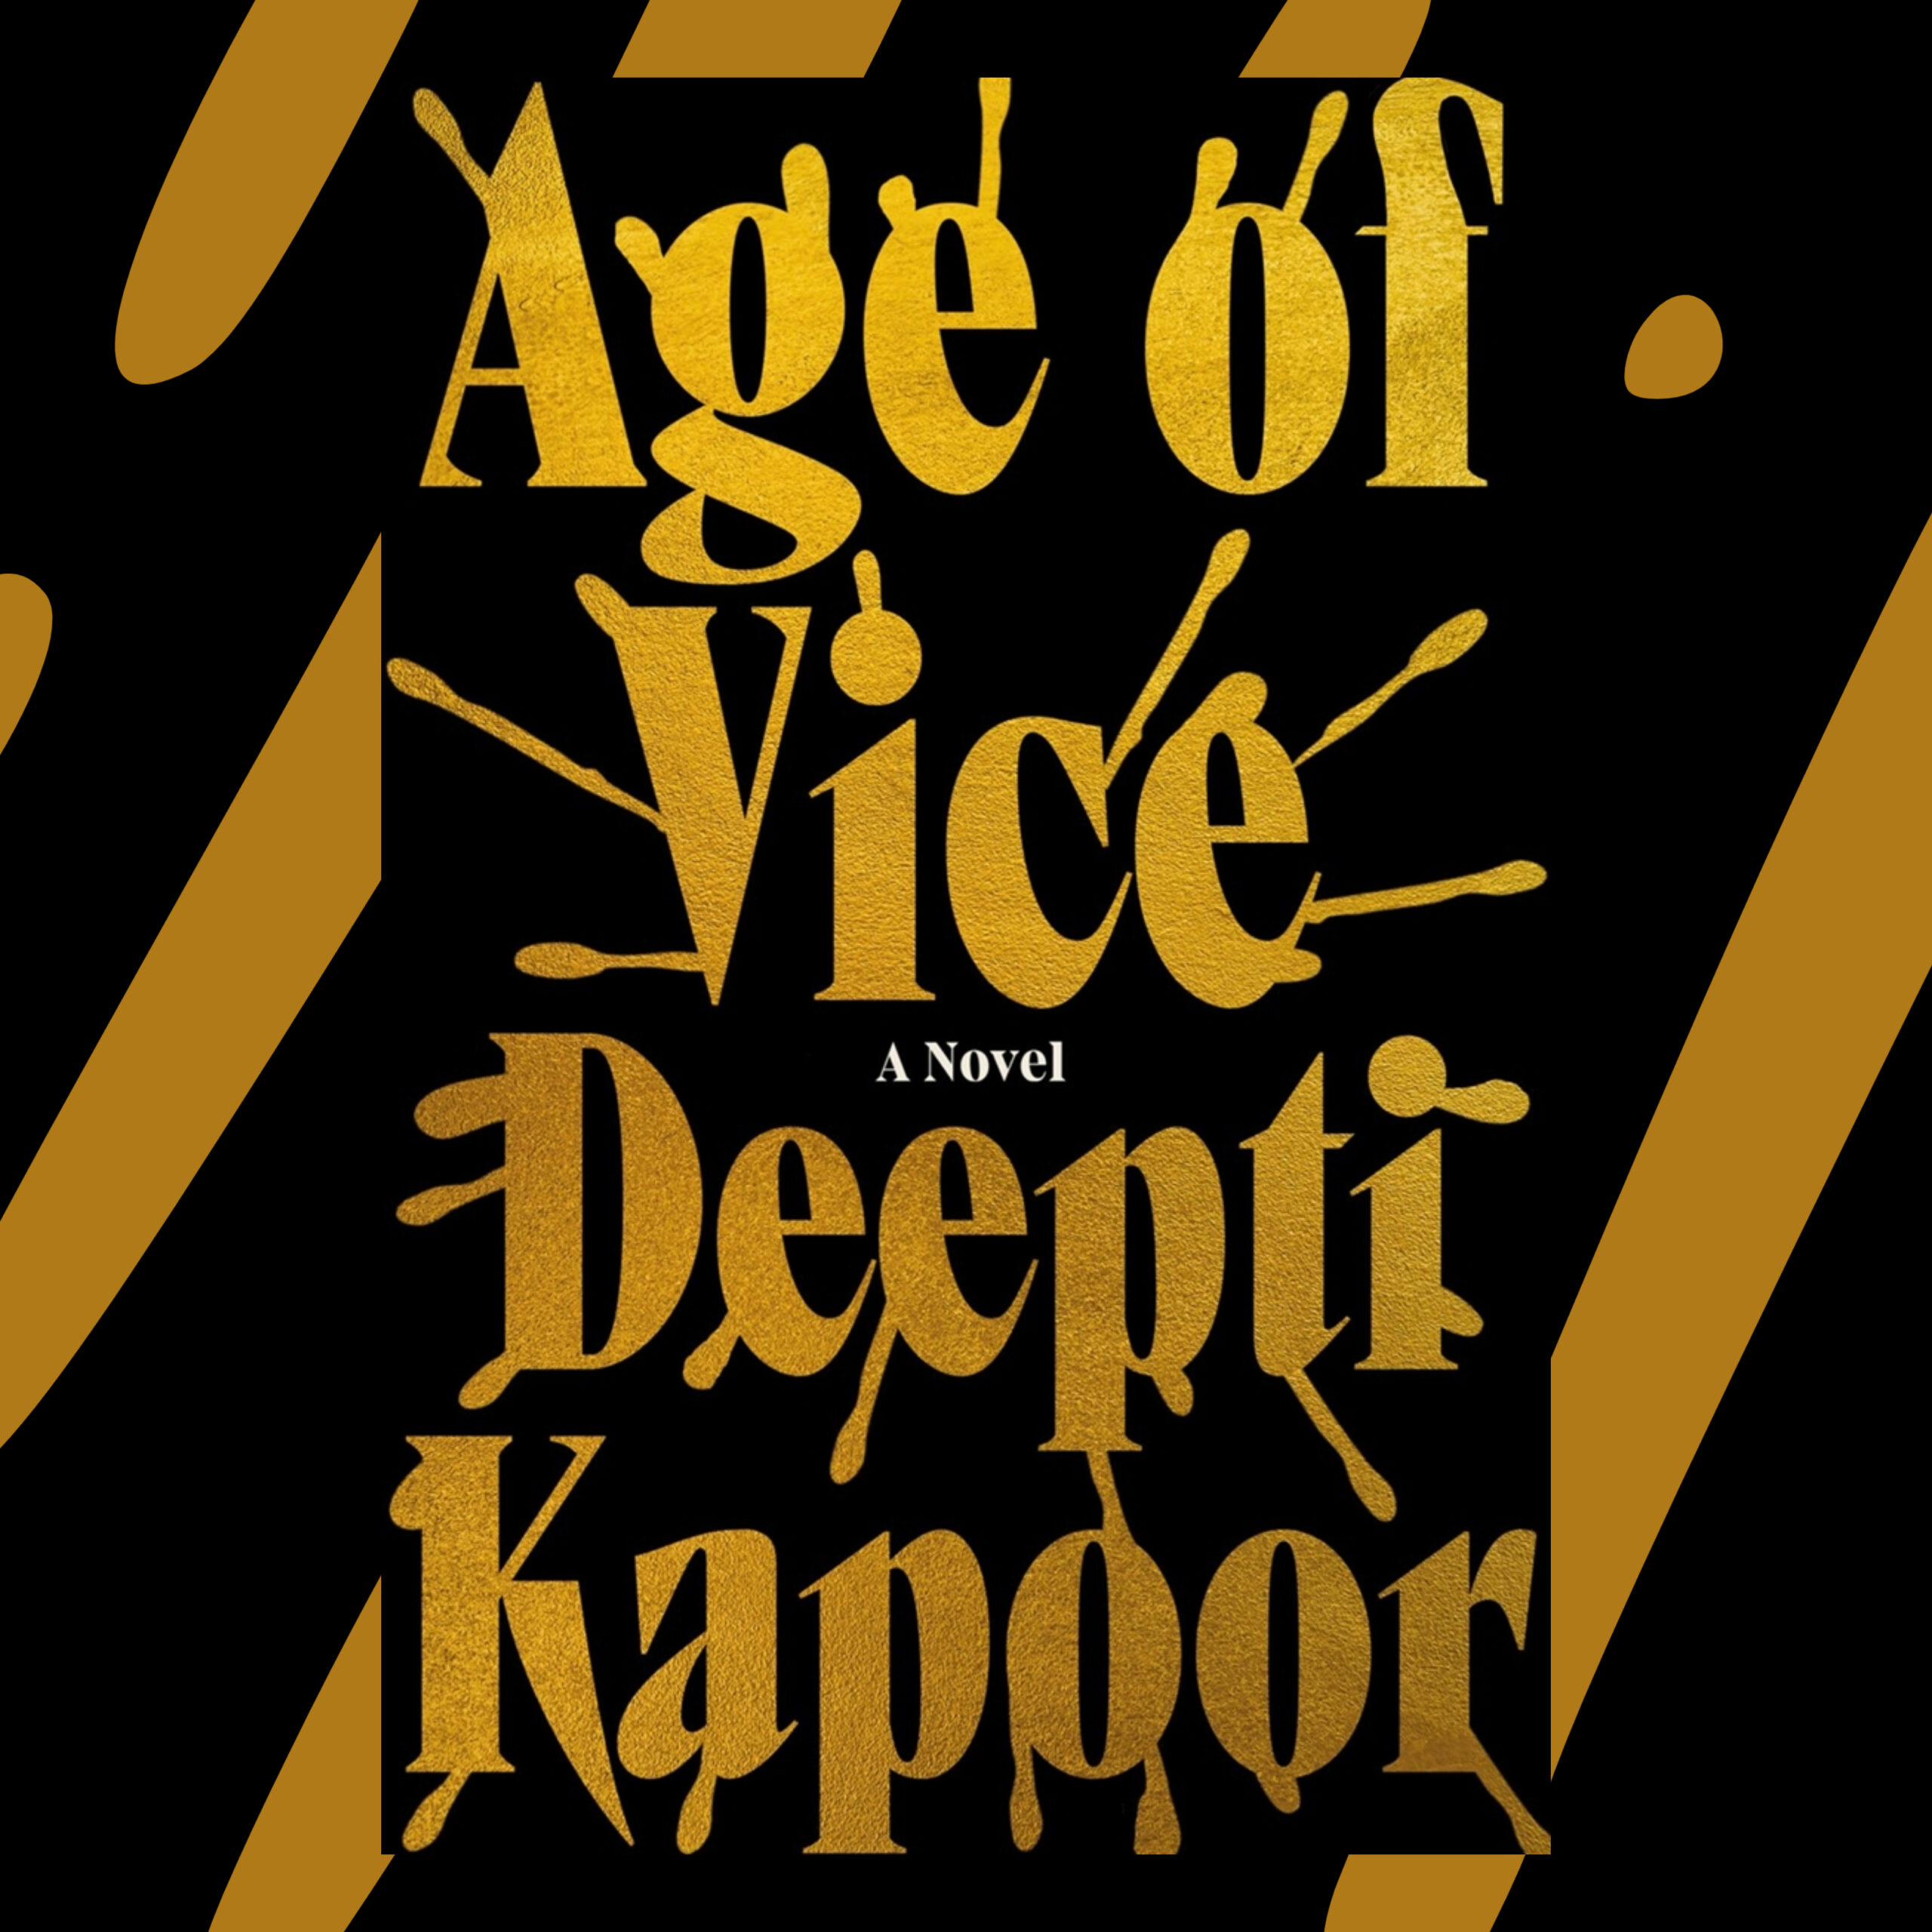 1808 - Deepti Kapoor - Age of Vice | The Book Sho